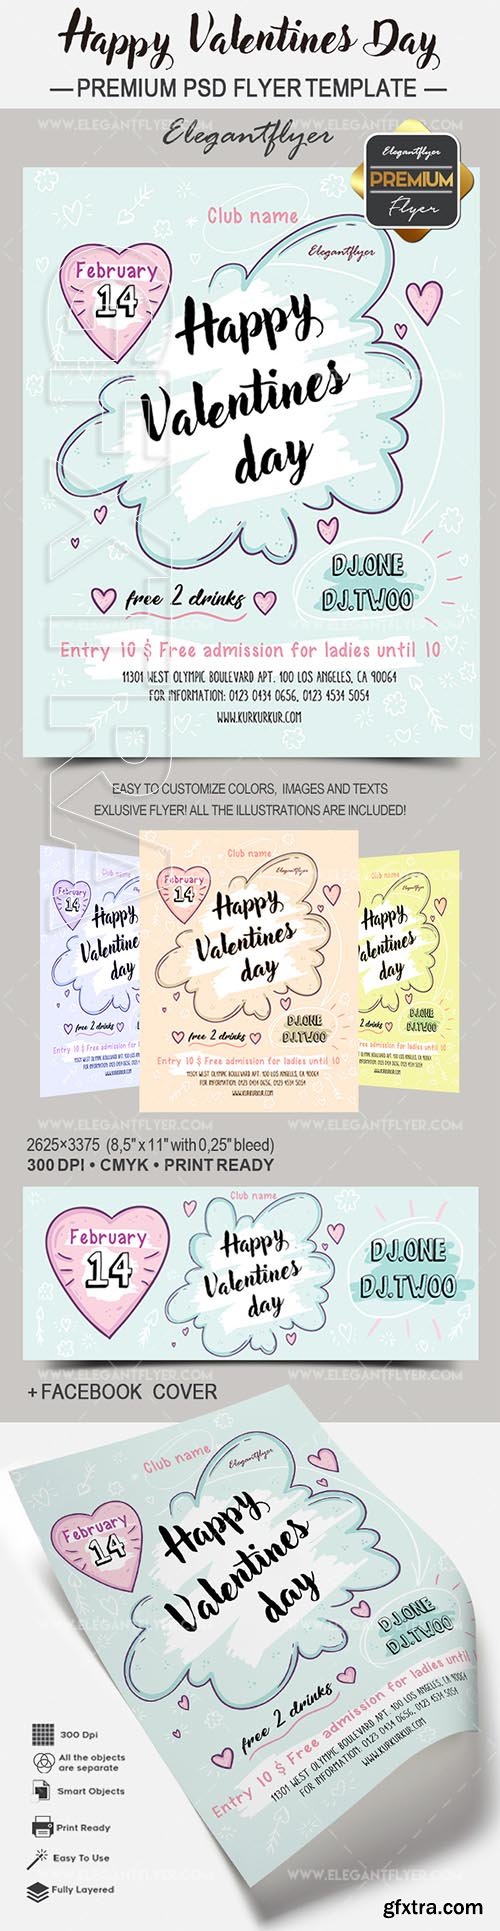 Happy Valentines Day – Flyer PSD Template + Facebook Cover